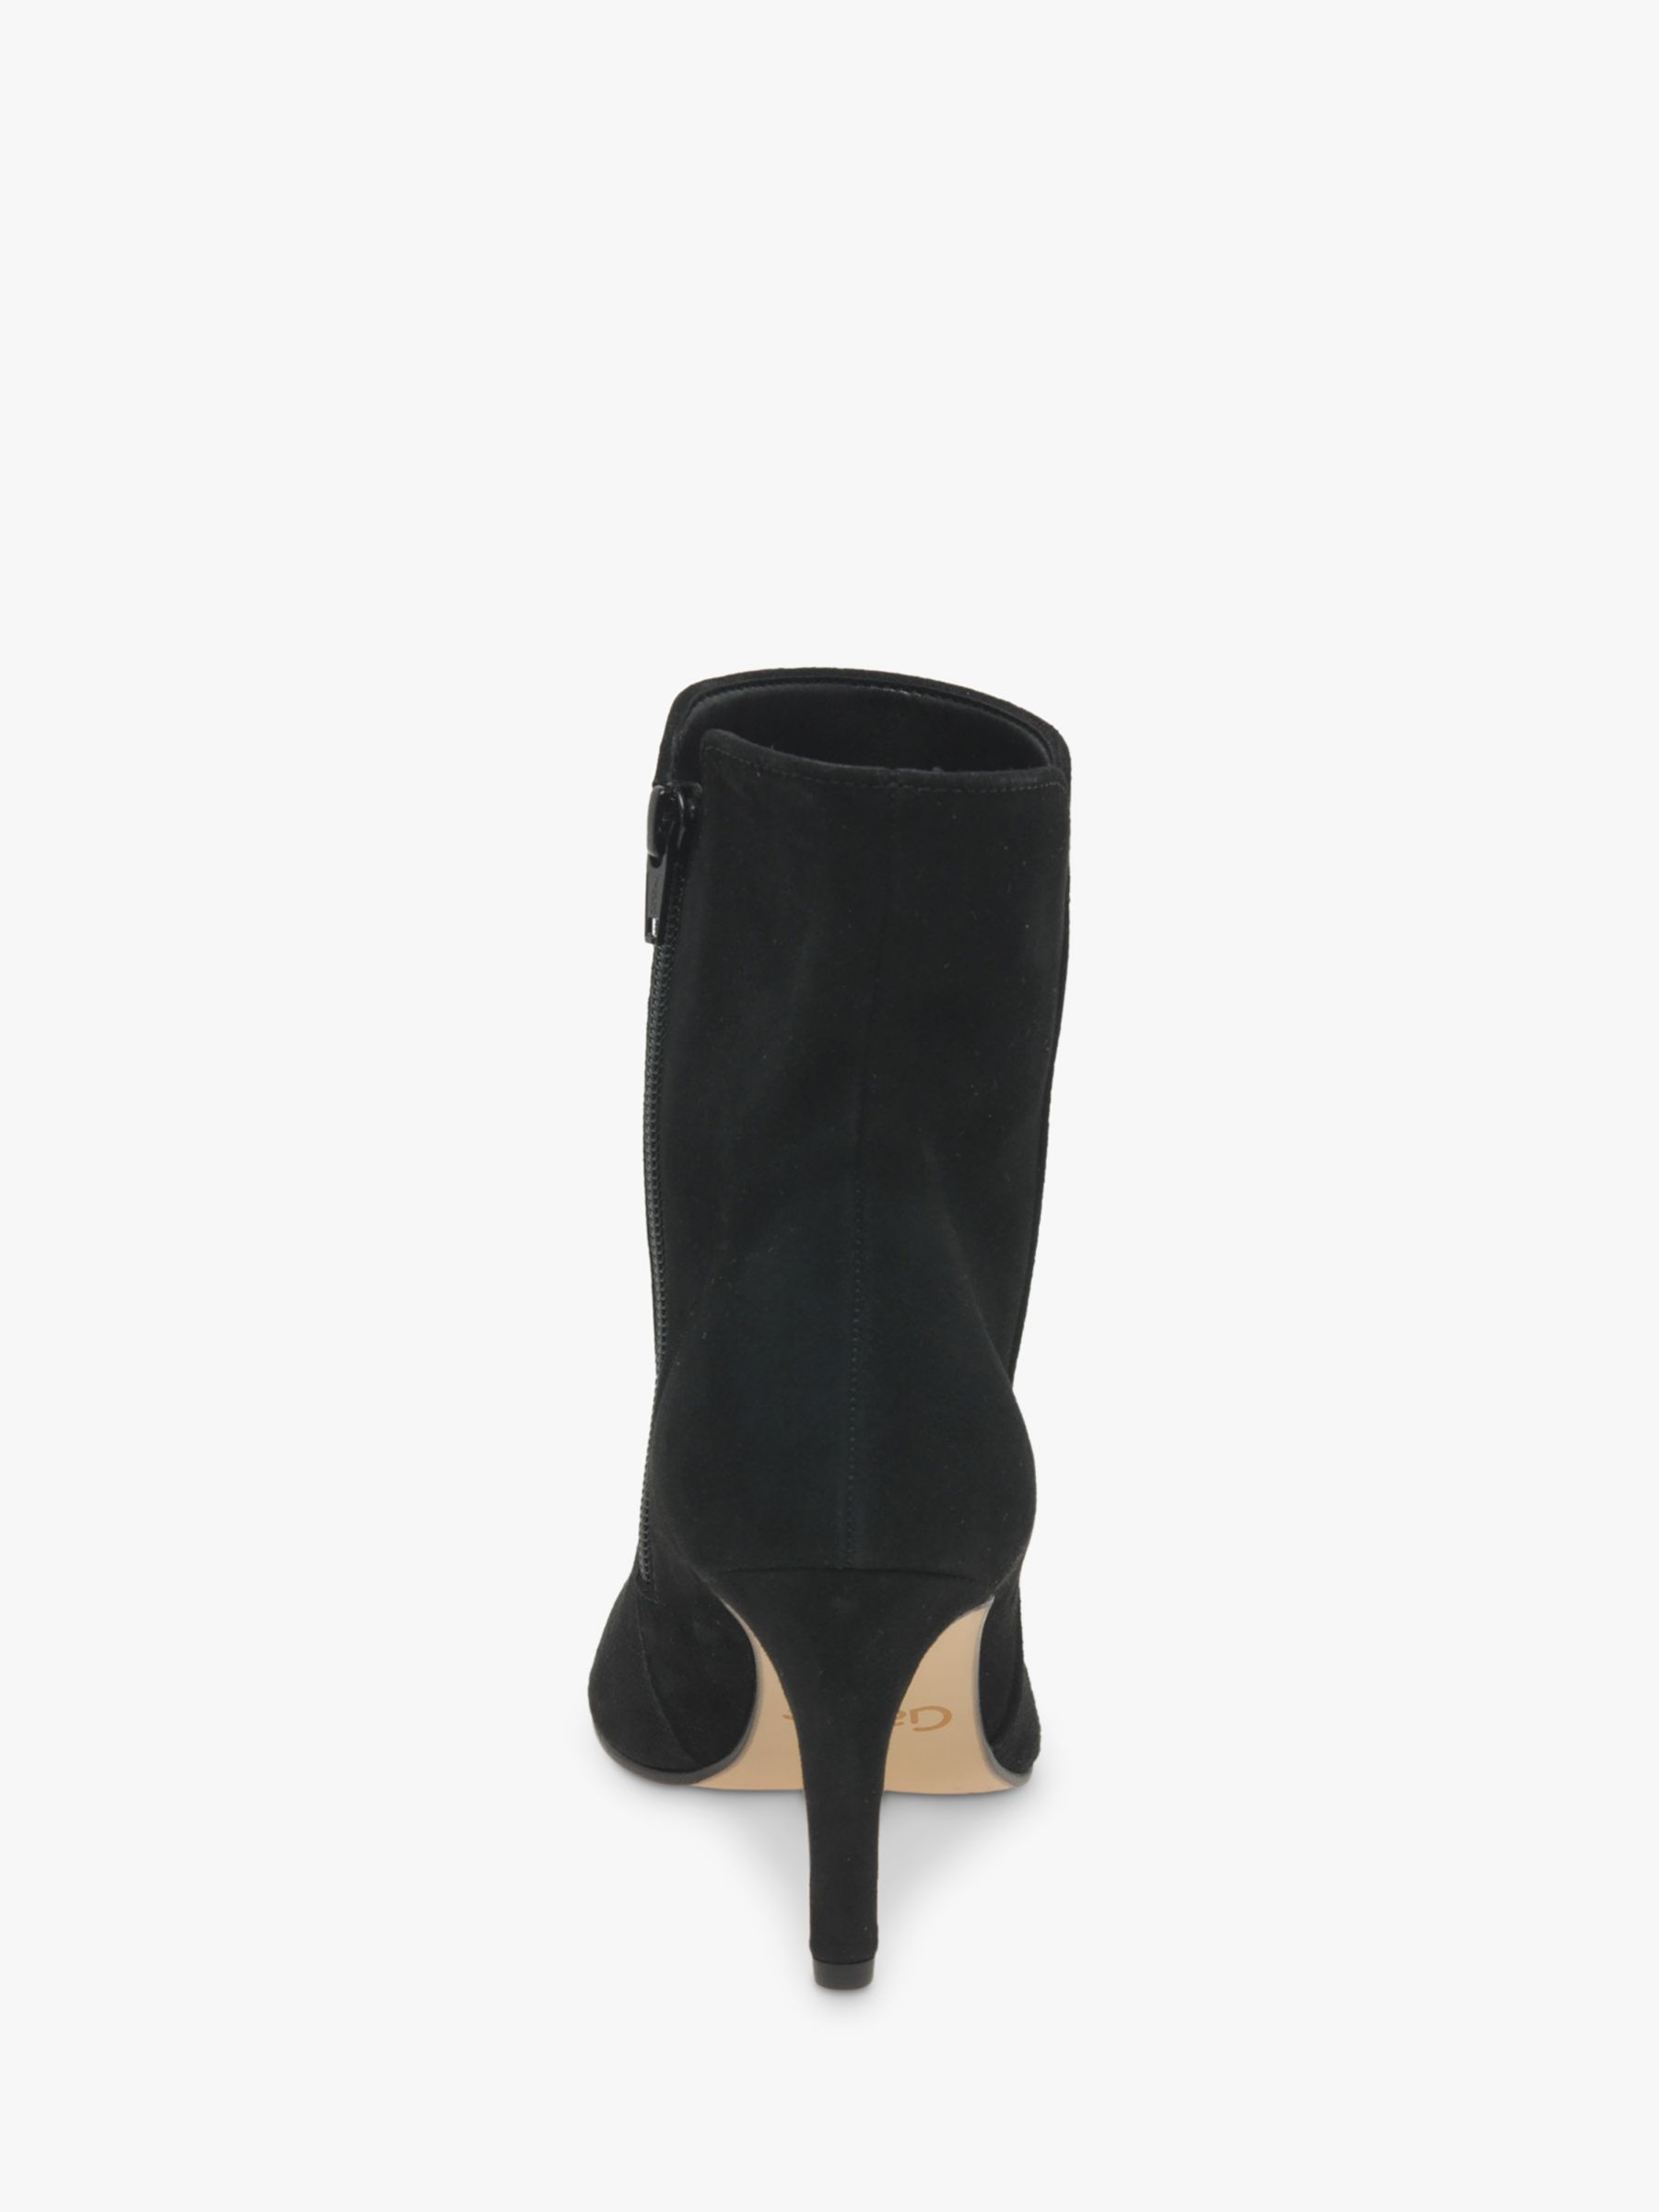 Gabor Bambro Dressy Suede Mid Heel Ankle Boots, Black at John Lewis ...